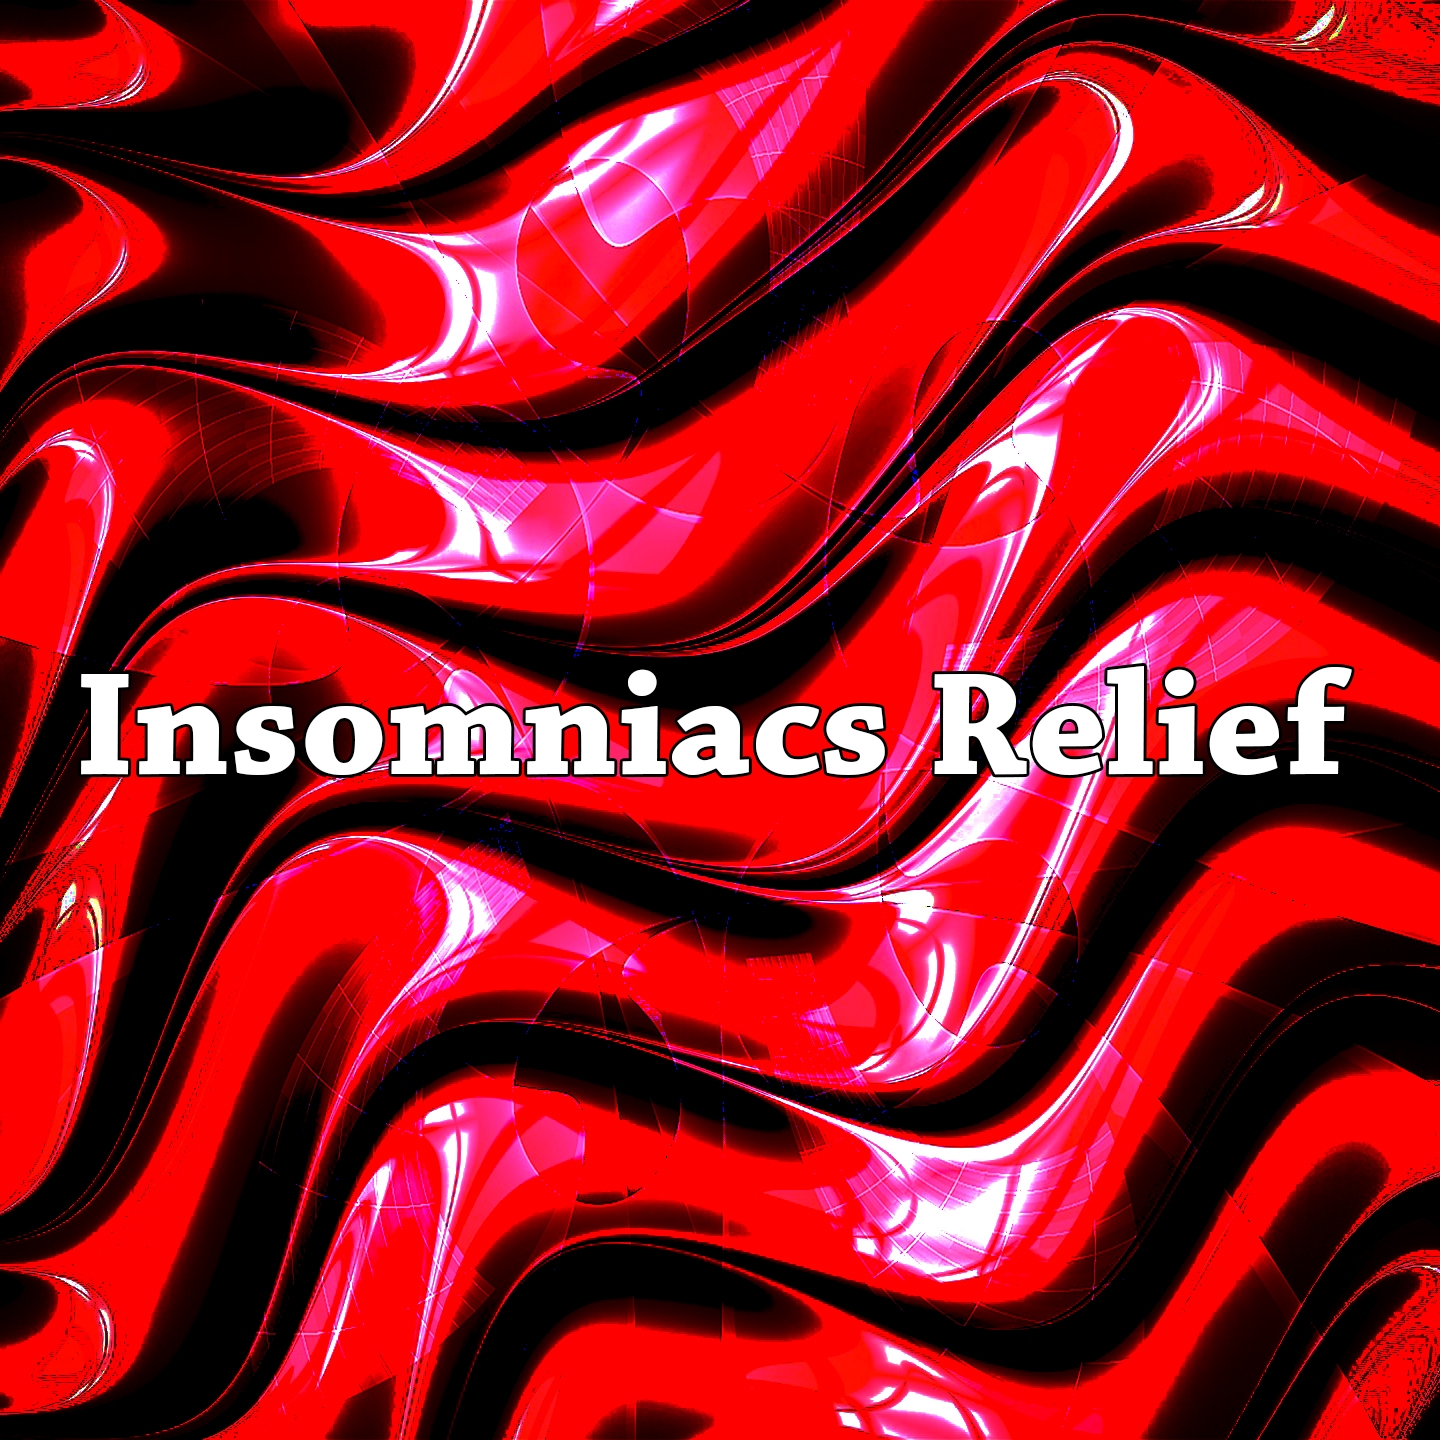 Insomniacs Relief